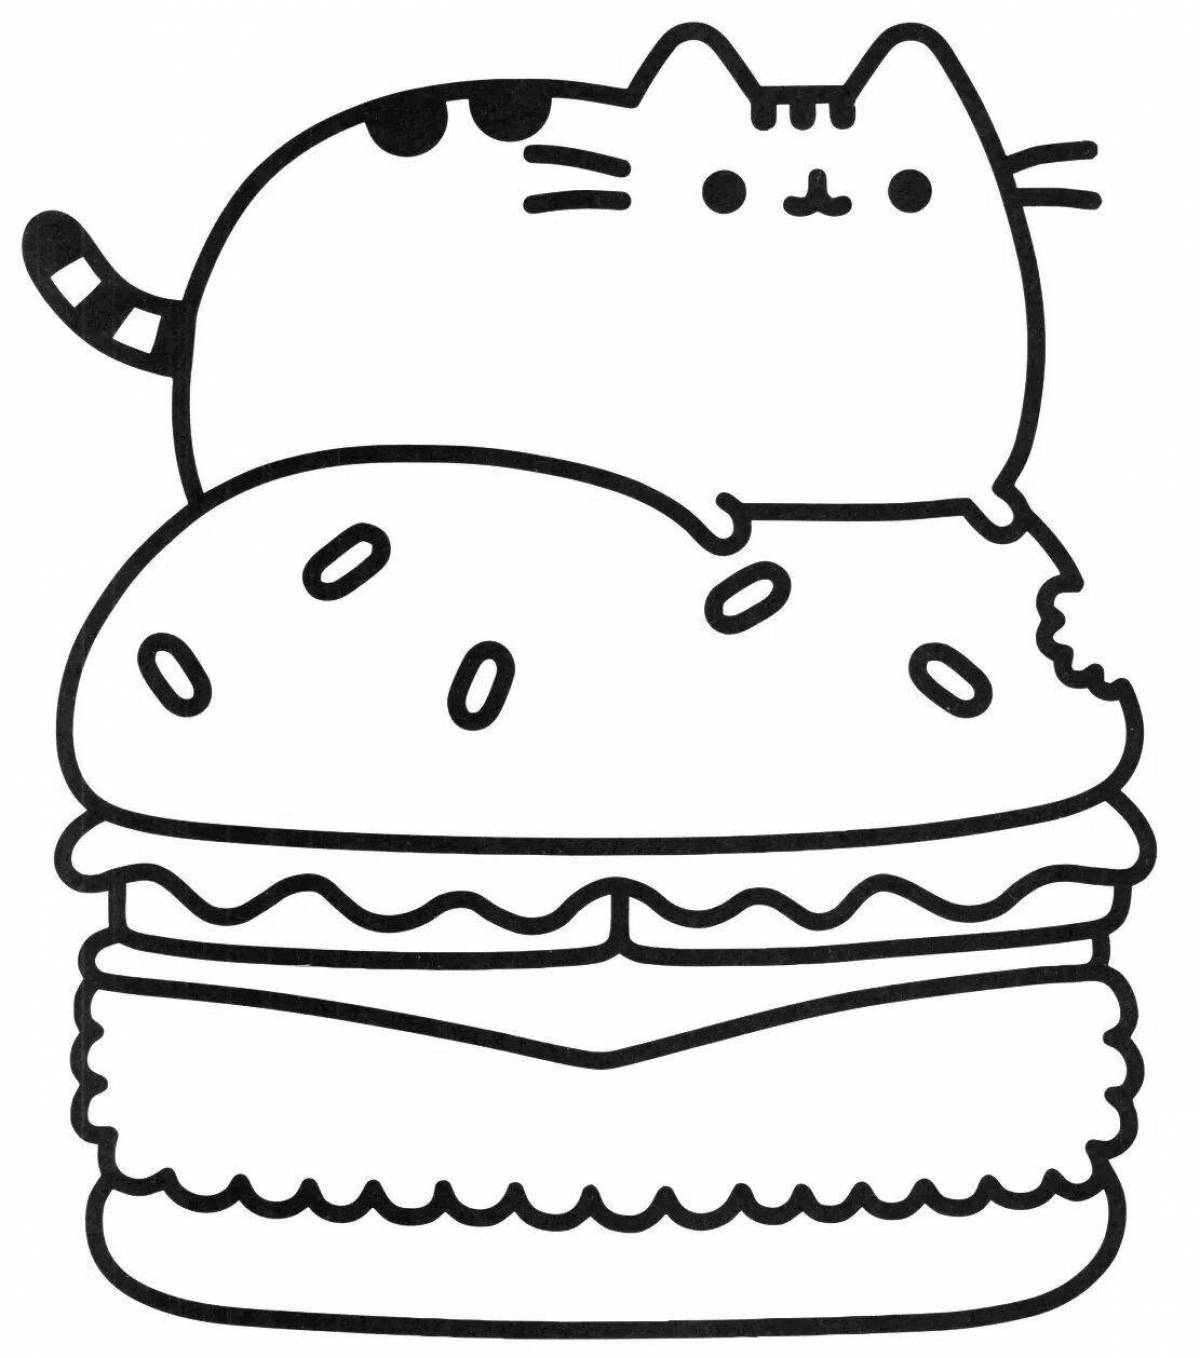 Coloring page wiggle pusheen cat